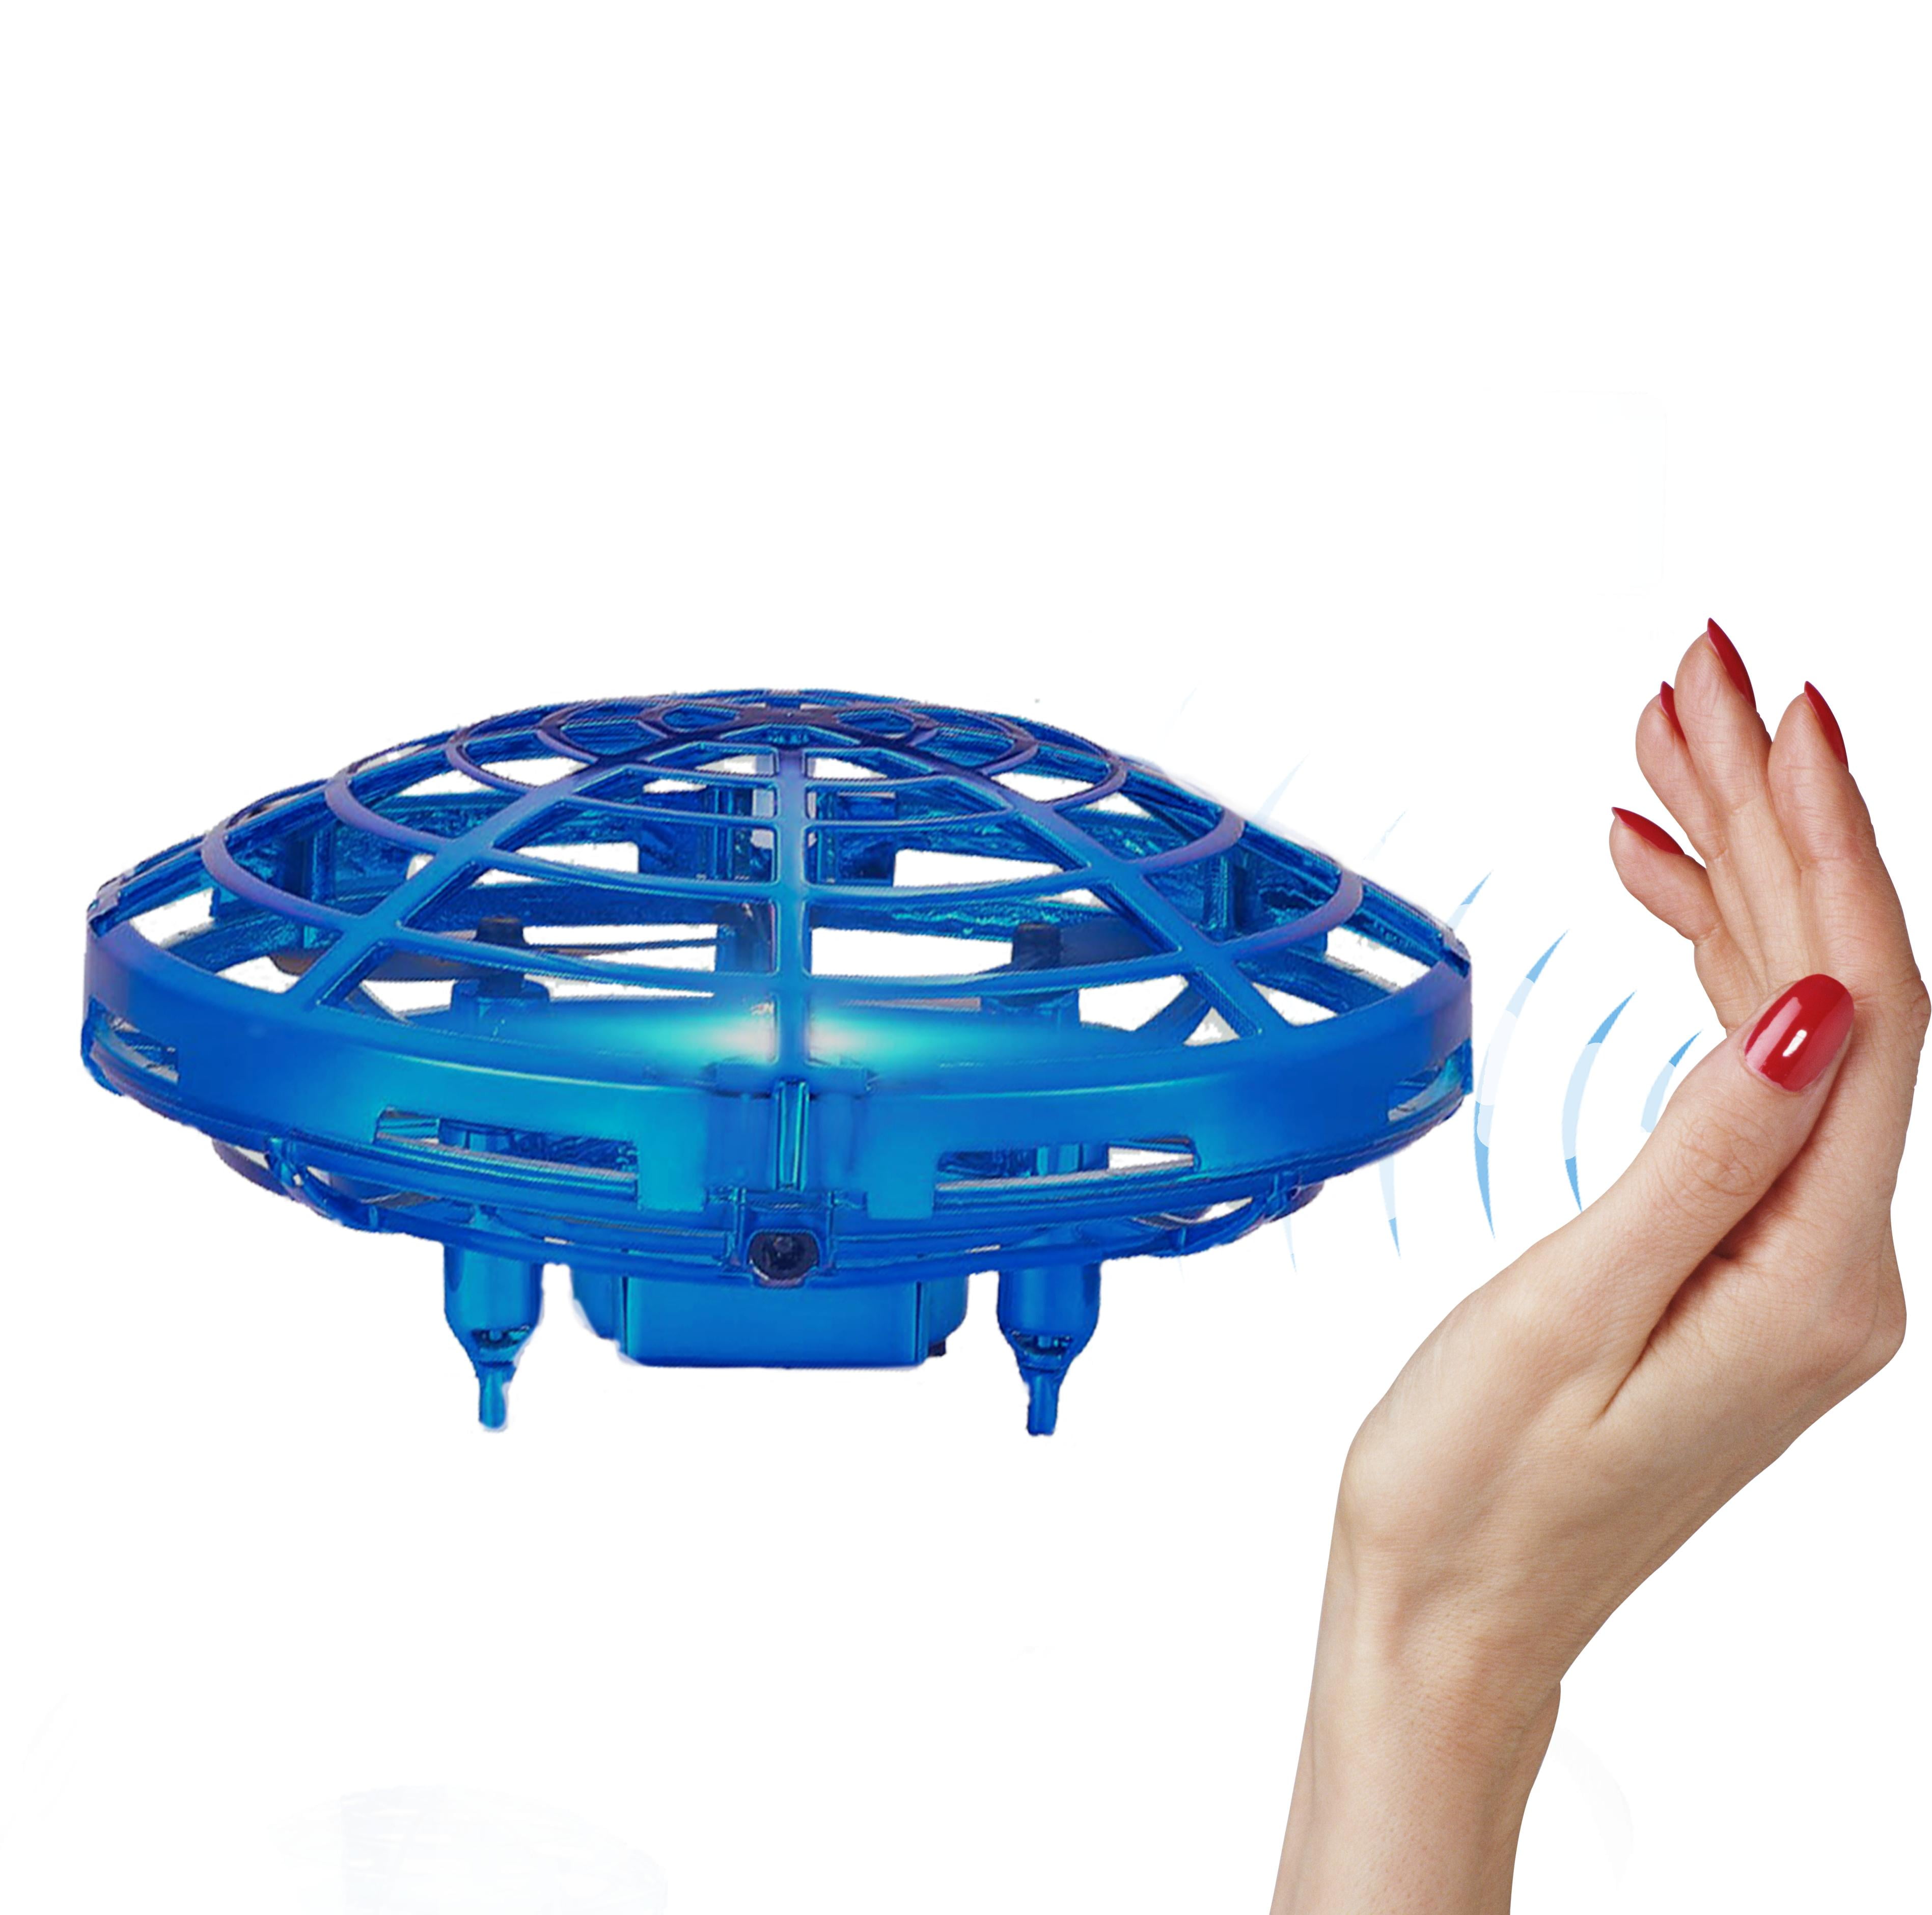 RC Mini Quadcopter UFO Hands Free Hover Drone Flying Toy w/ 3 Micro Sensors Gift 